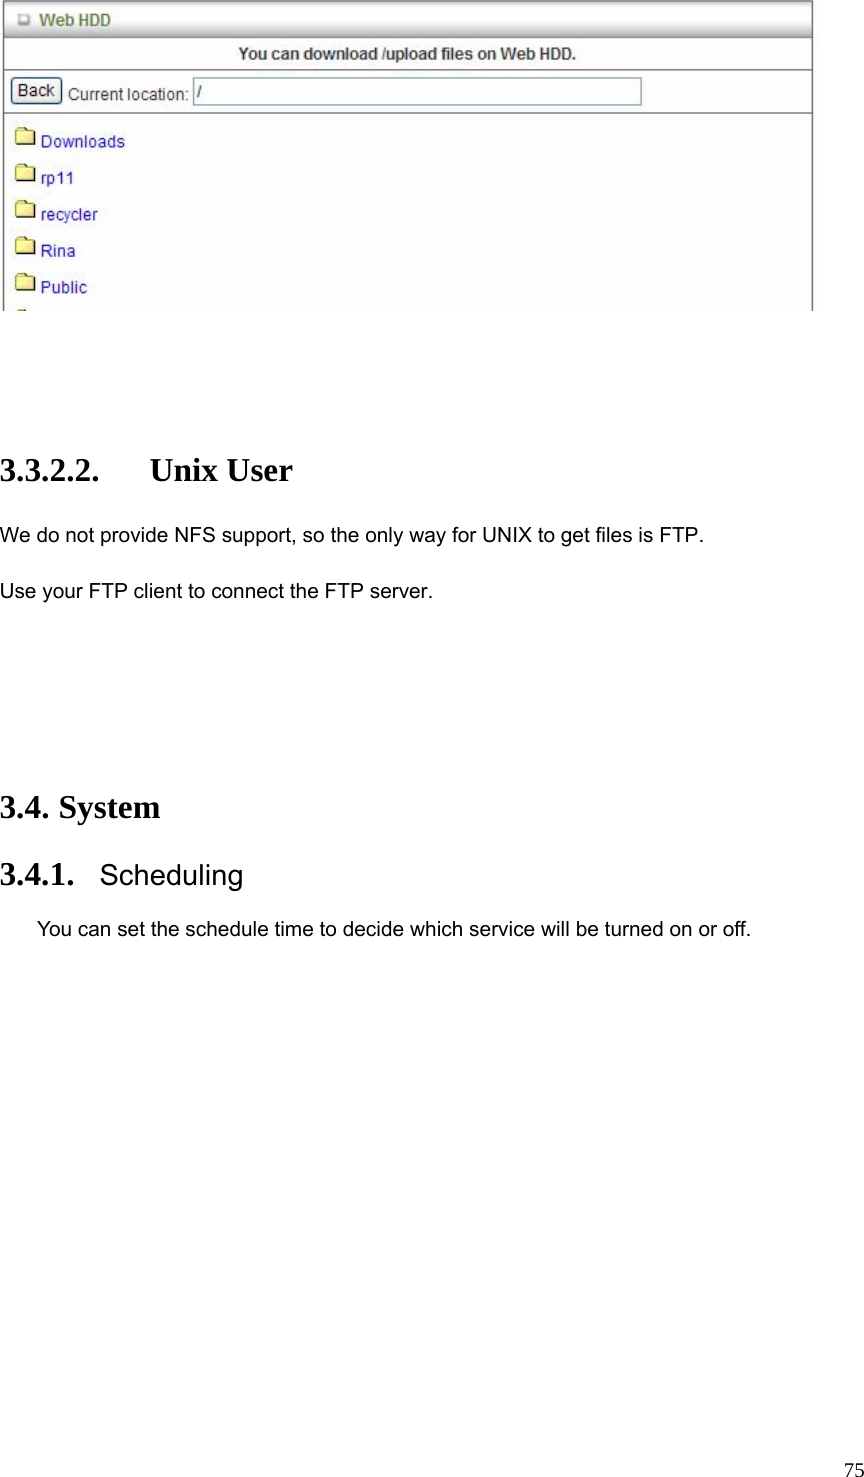  75    3.3.2.2. Unix User We do not provide NFS support, so the only way for UNIX to get files is FTP. Use your FTP client to connect the FTP server.   3.4. System 3.4.1. Scheduling You can set the schedule time to decide which service will be turned on or off.   